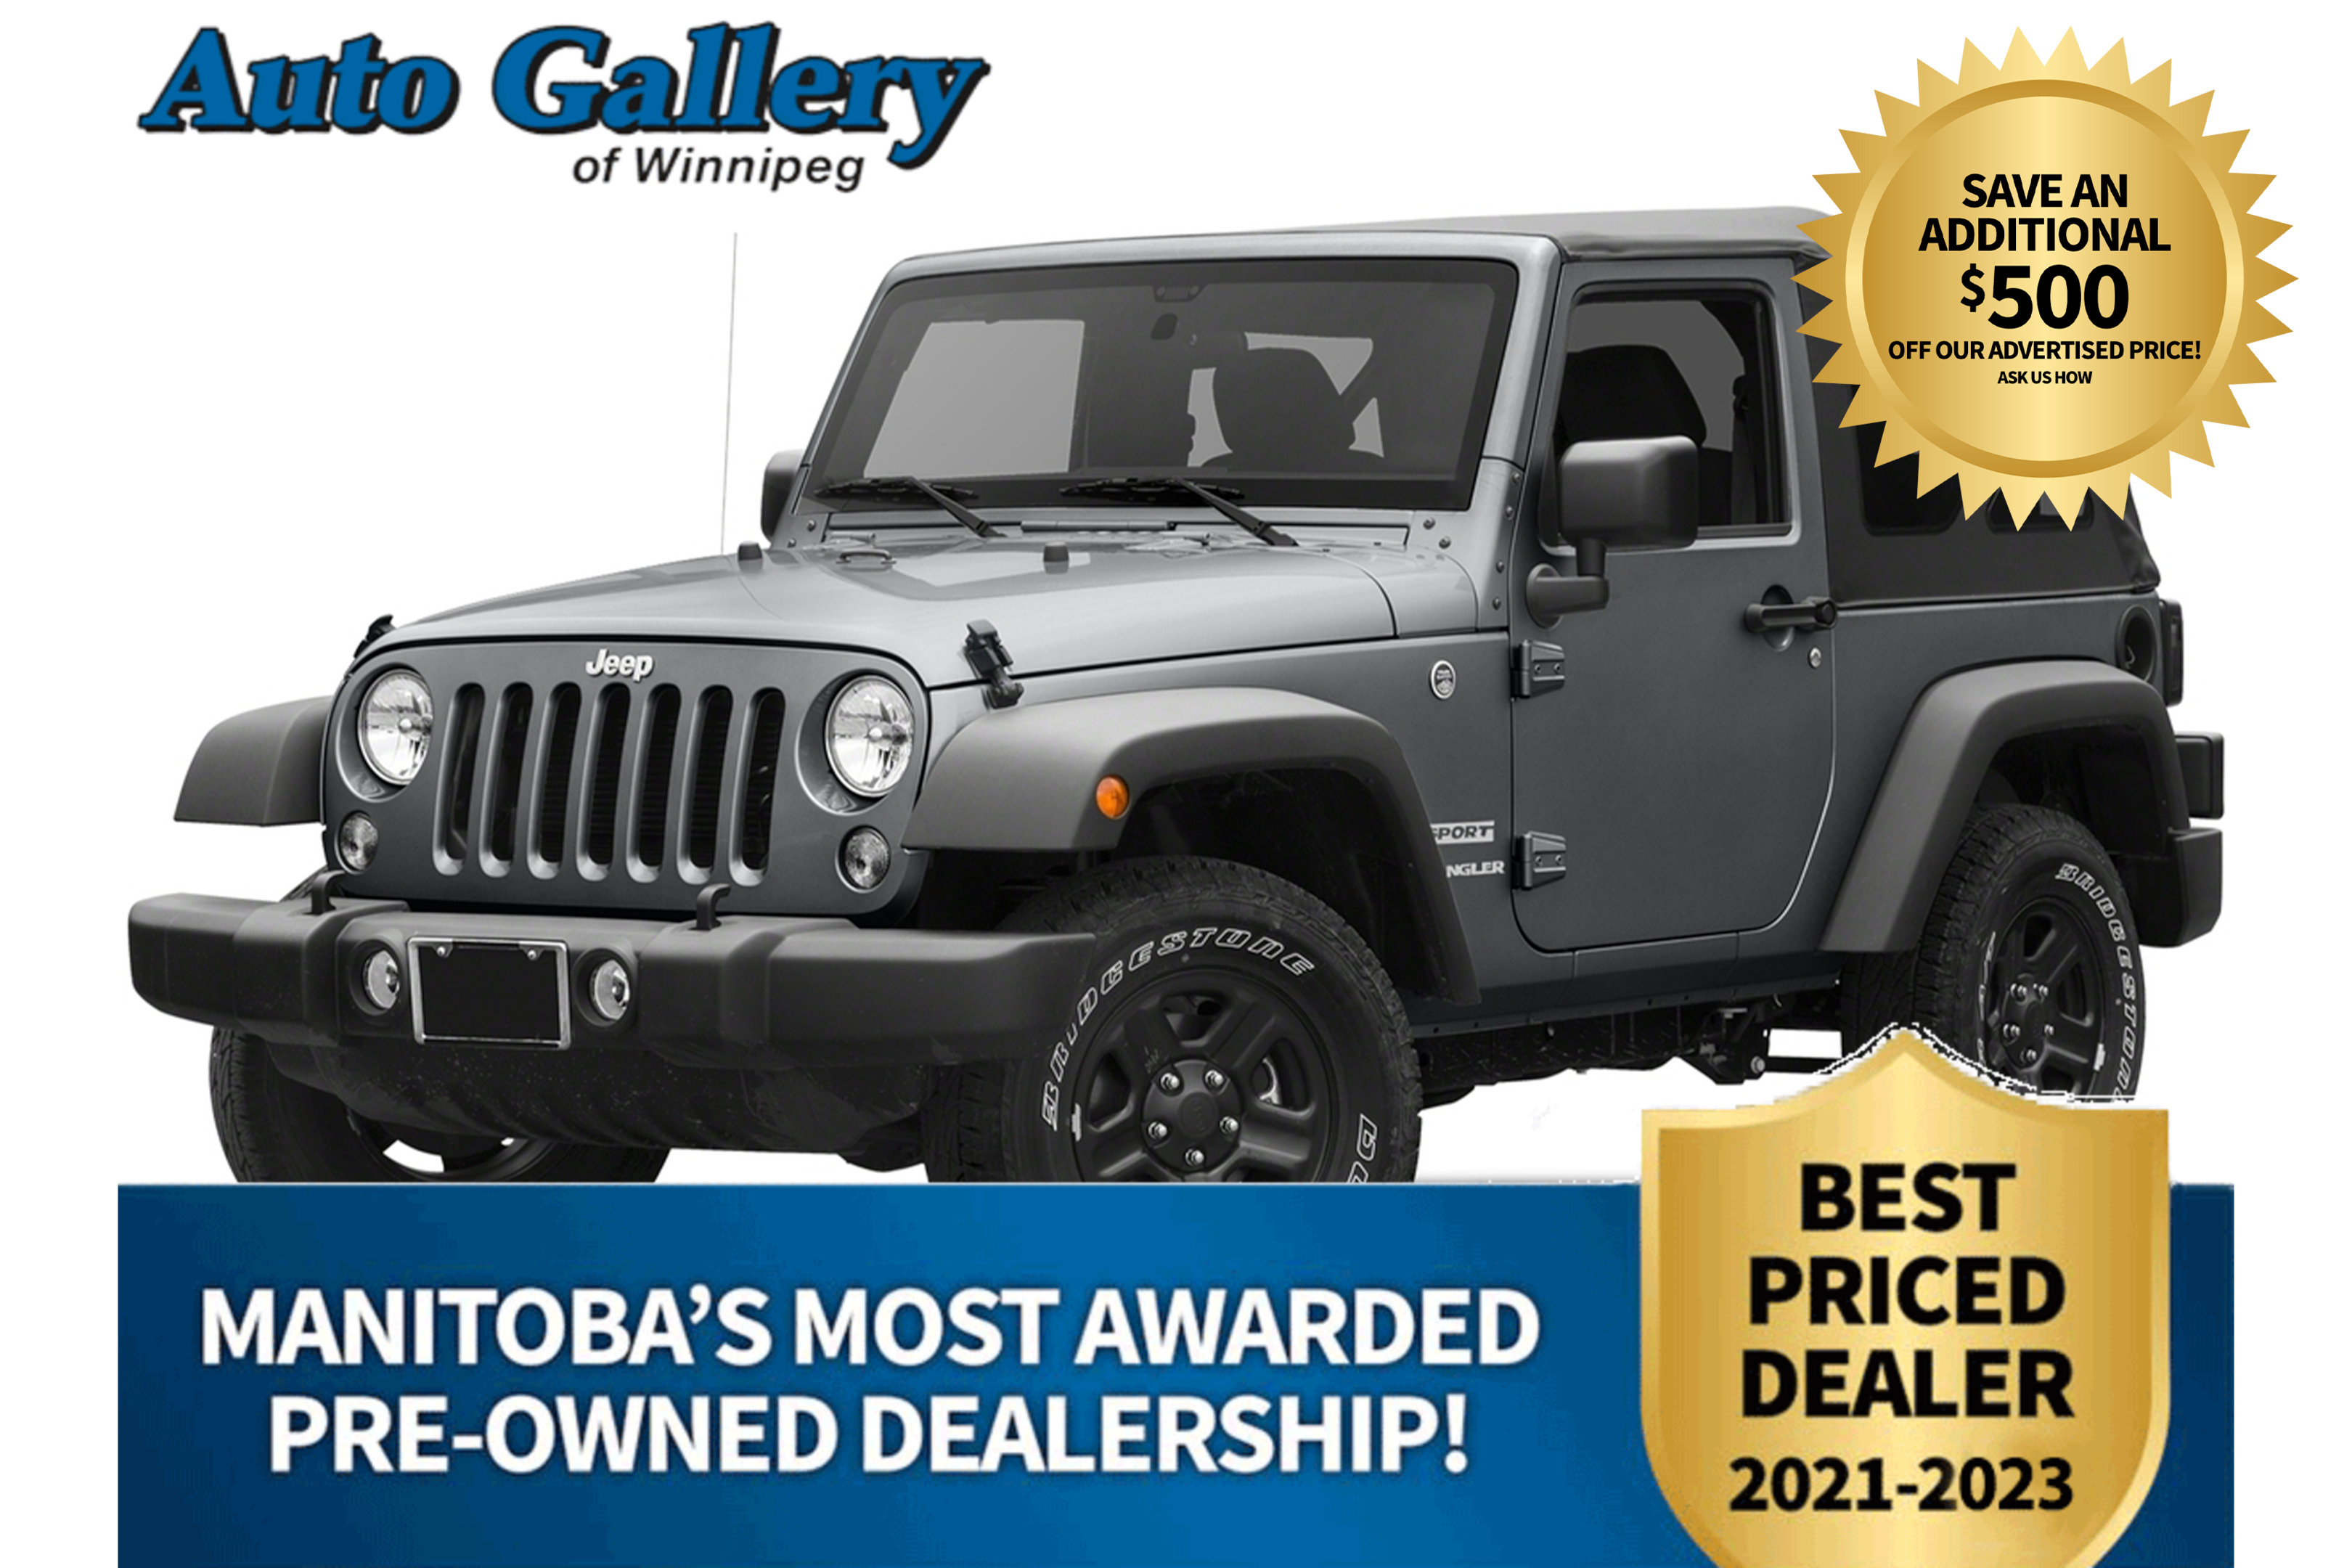 2017 Jeep Wrangler 4WD, Sport, A/C, CRUISE CONTROL, CLEAN CARFAX! 